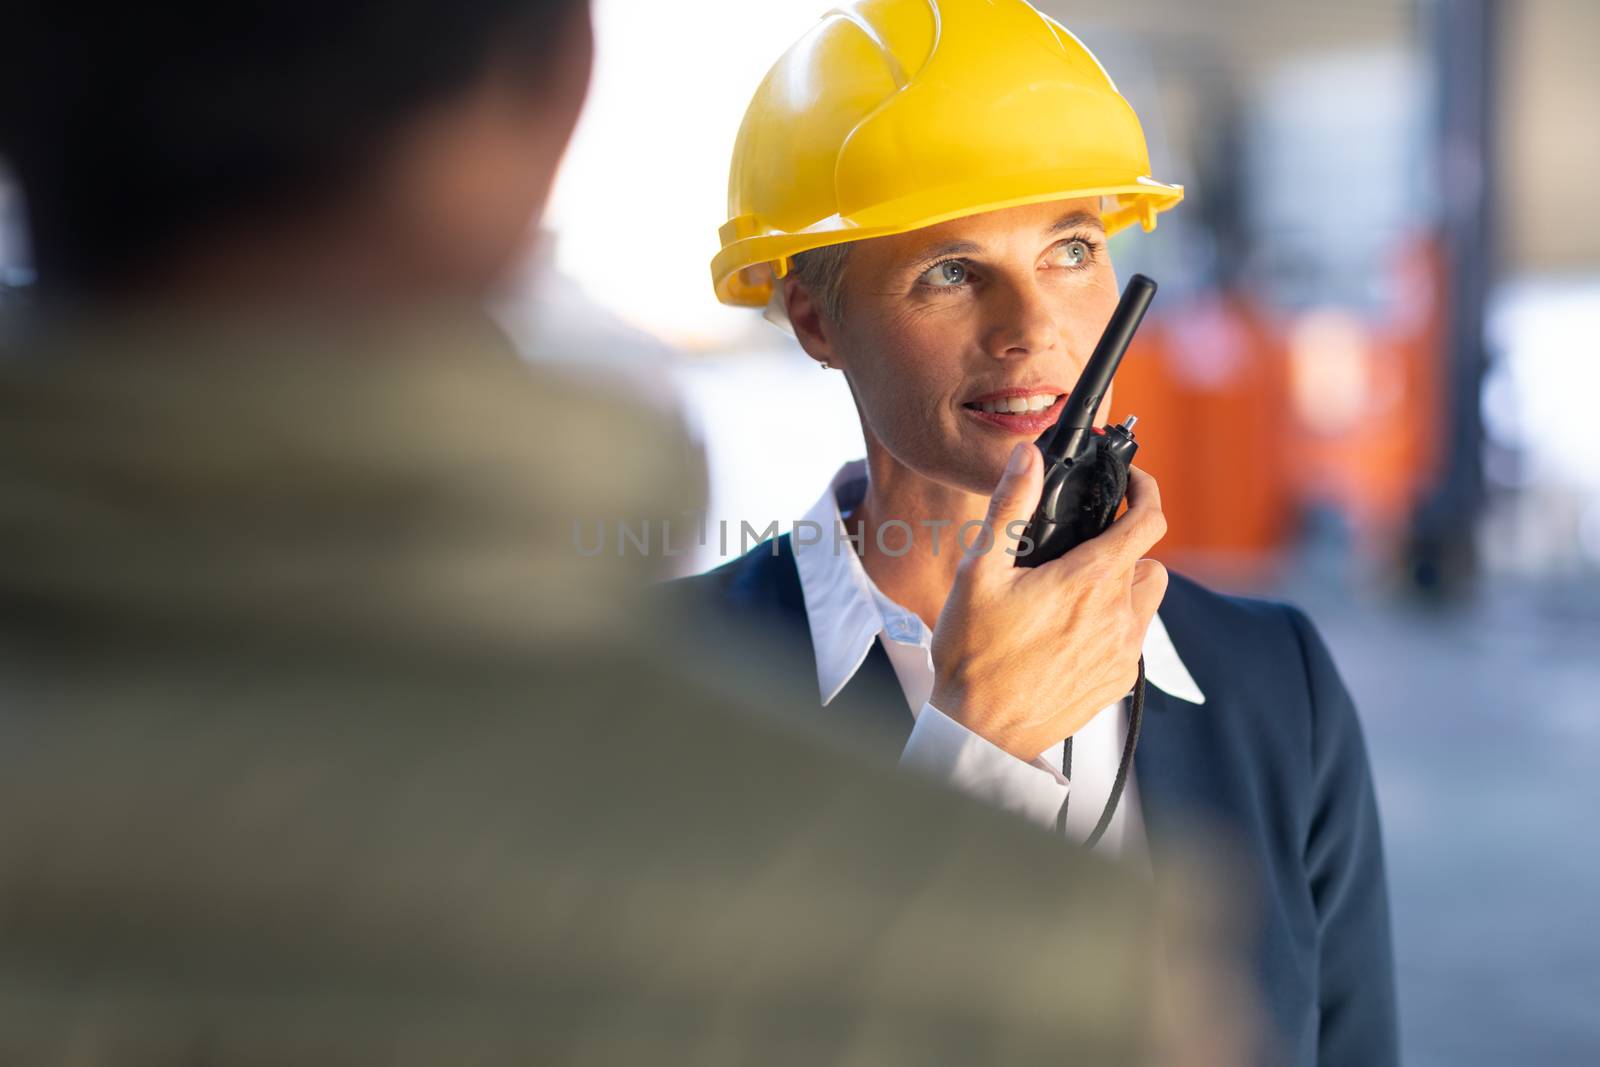 Front view of Caucasian Mature female manager talking on walkie talkie in warehouse. This is a freight transportation and distribution warehouse. Industrial and industrial workers concept